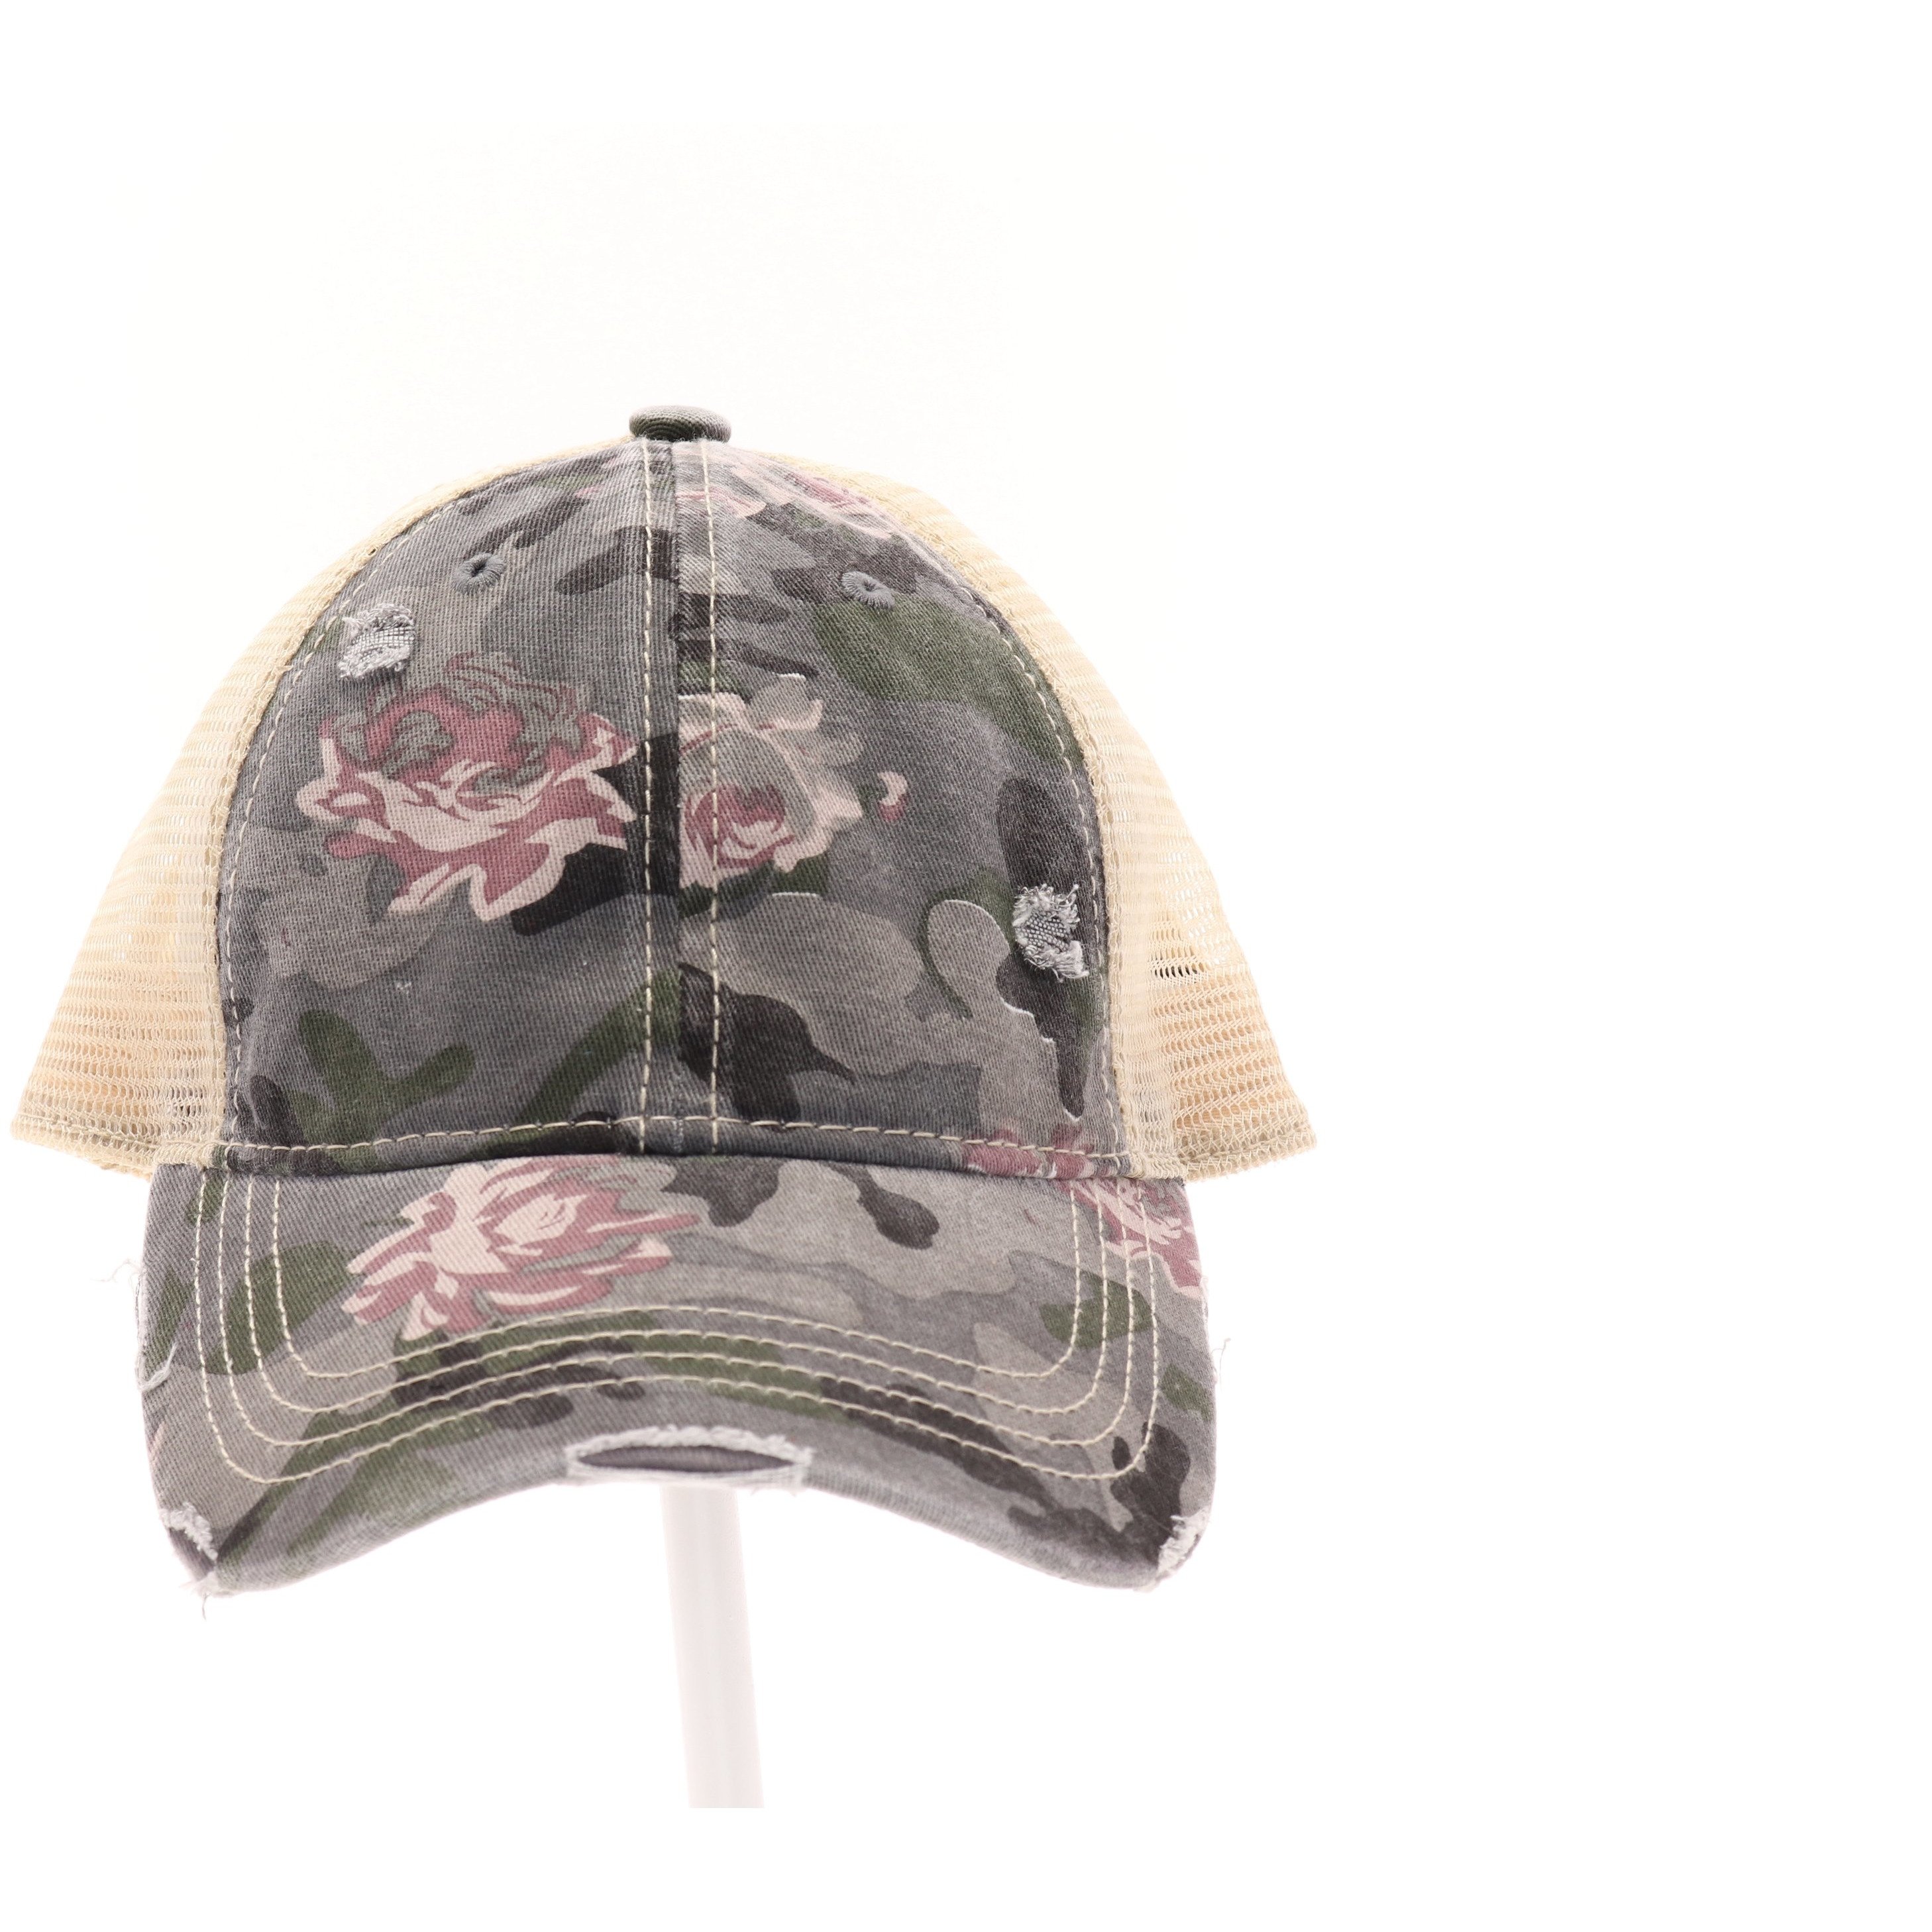 A1 Floral Camouflage Mesh Back High Pony CC Ball Cap